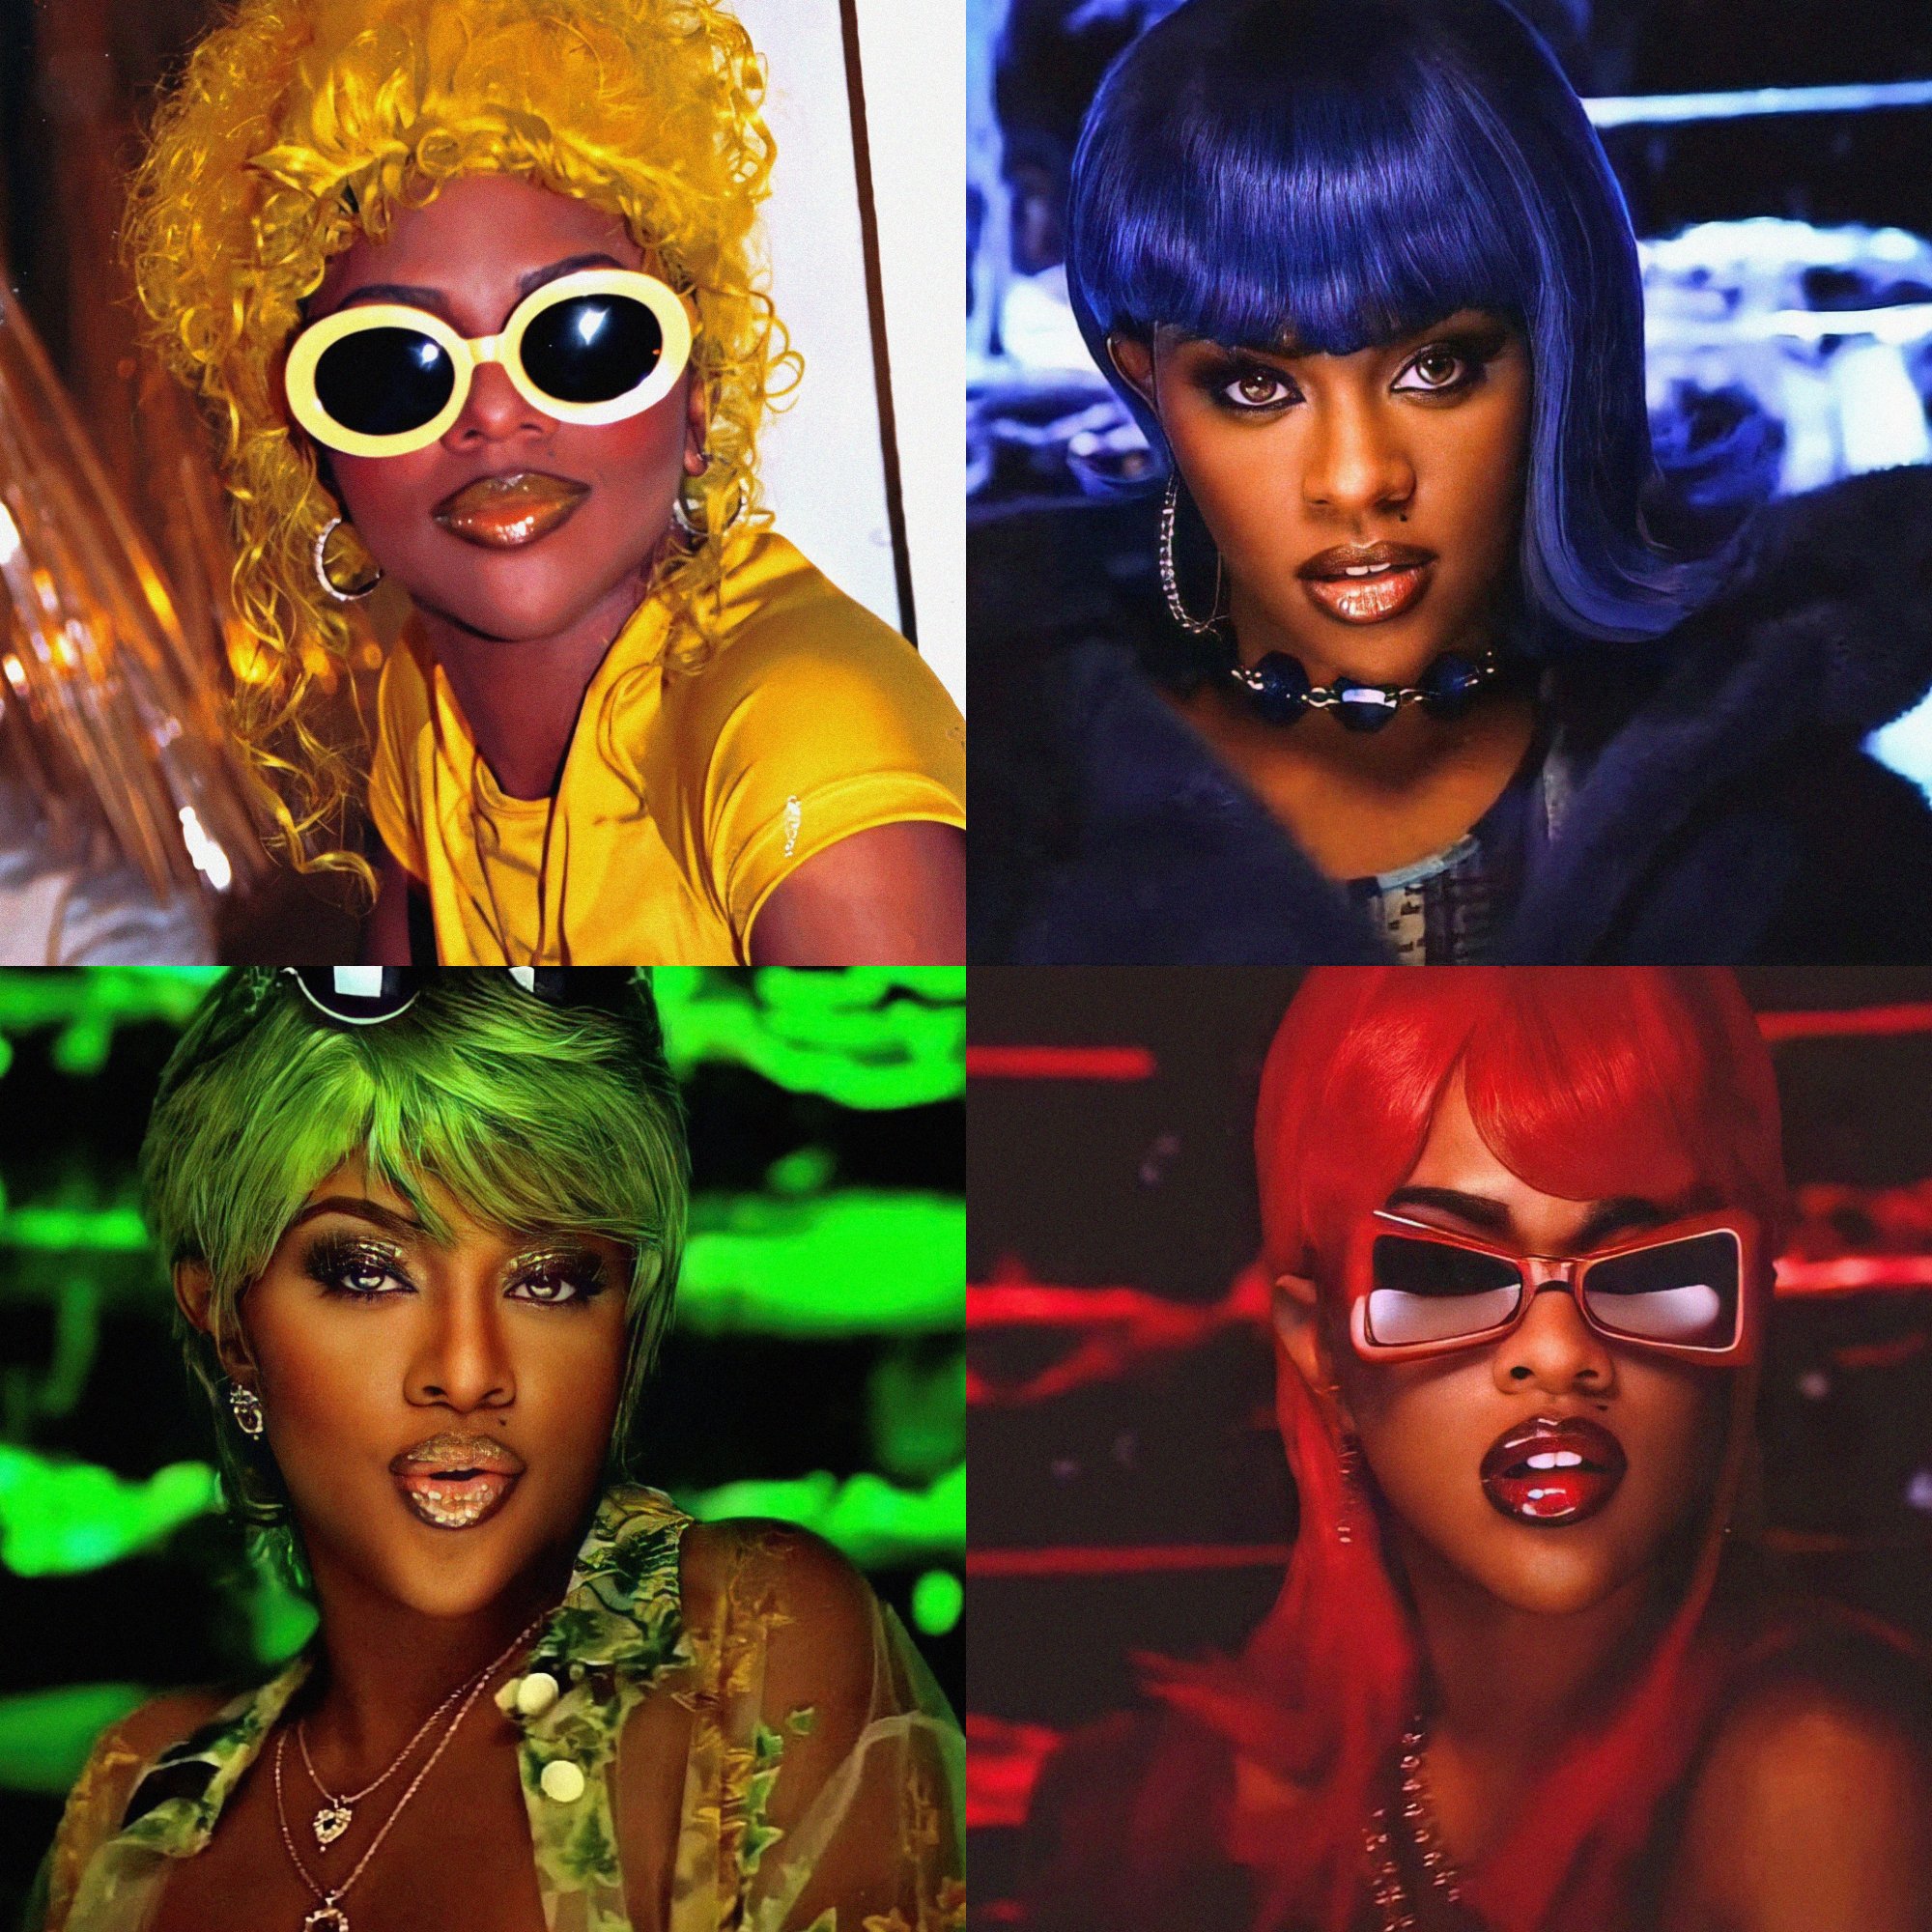 Lil' Kim Media on Twitter: "25 years ago today Lil' Kim released “Crush On  You” featuring Lil' Cease. The music video was directed by Lance Rivera and  styled by Misa Hylton, it